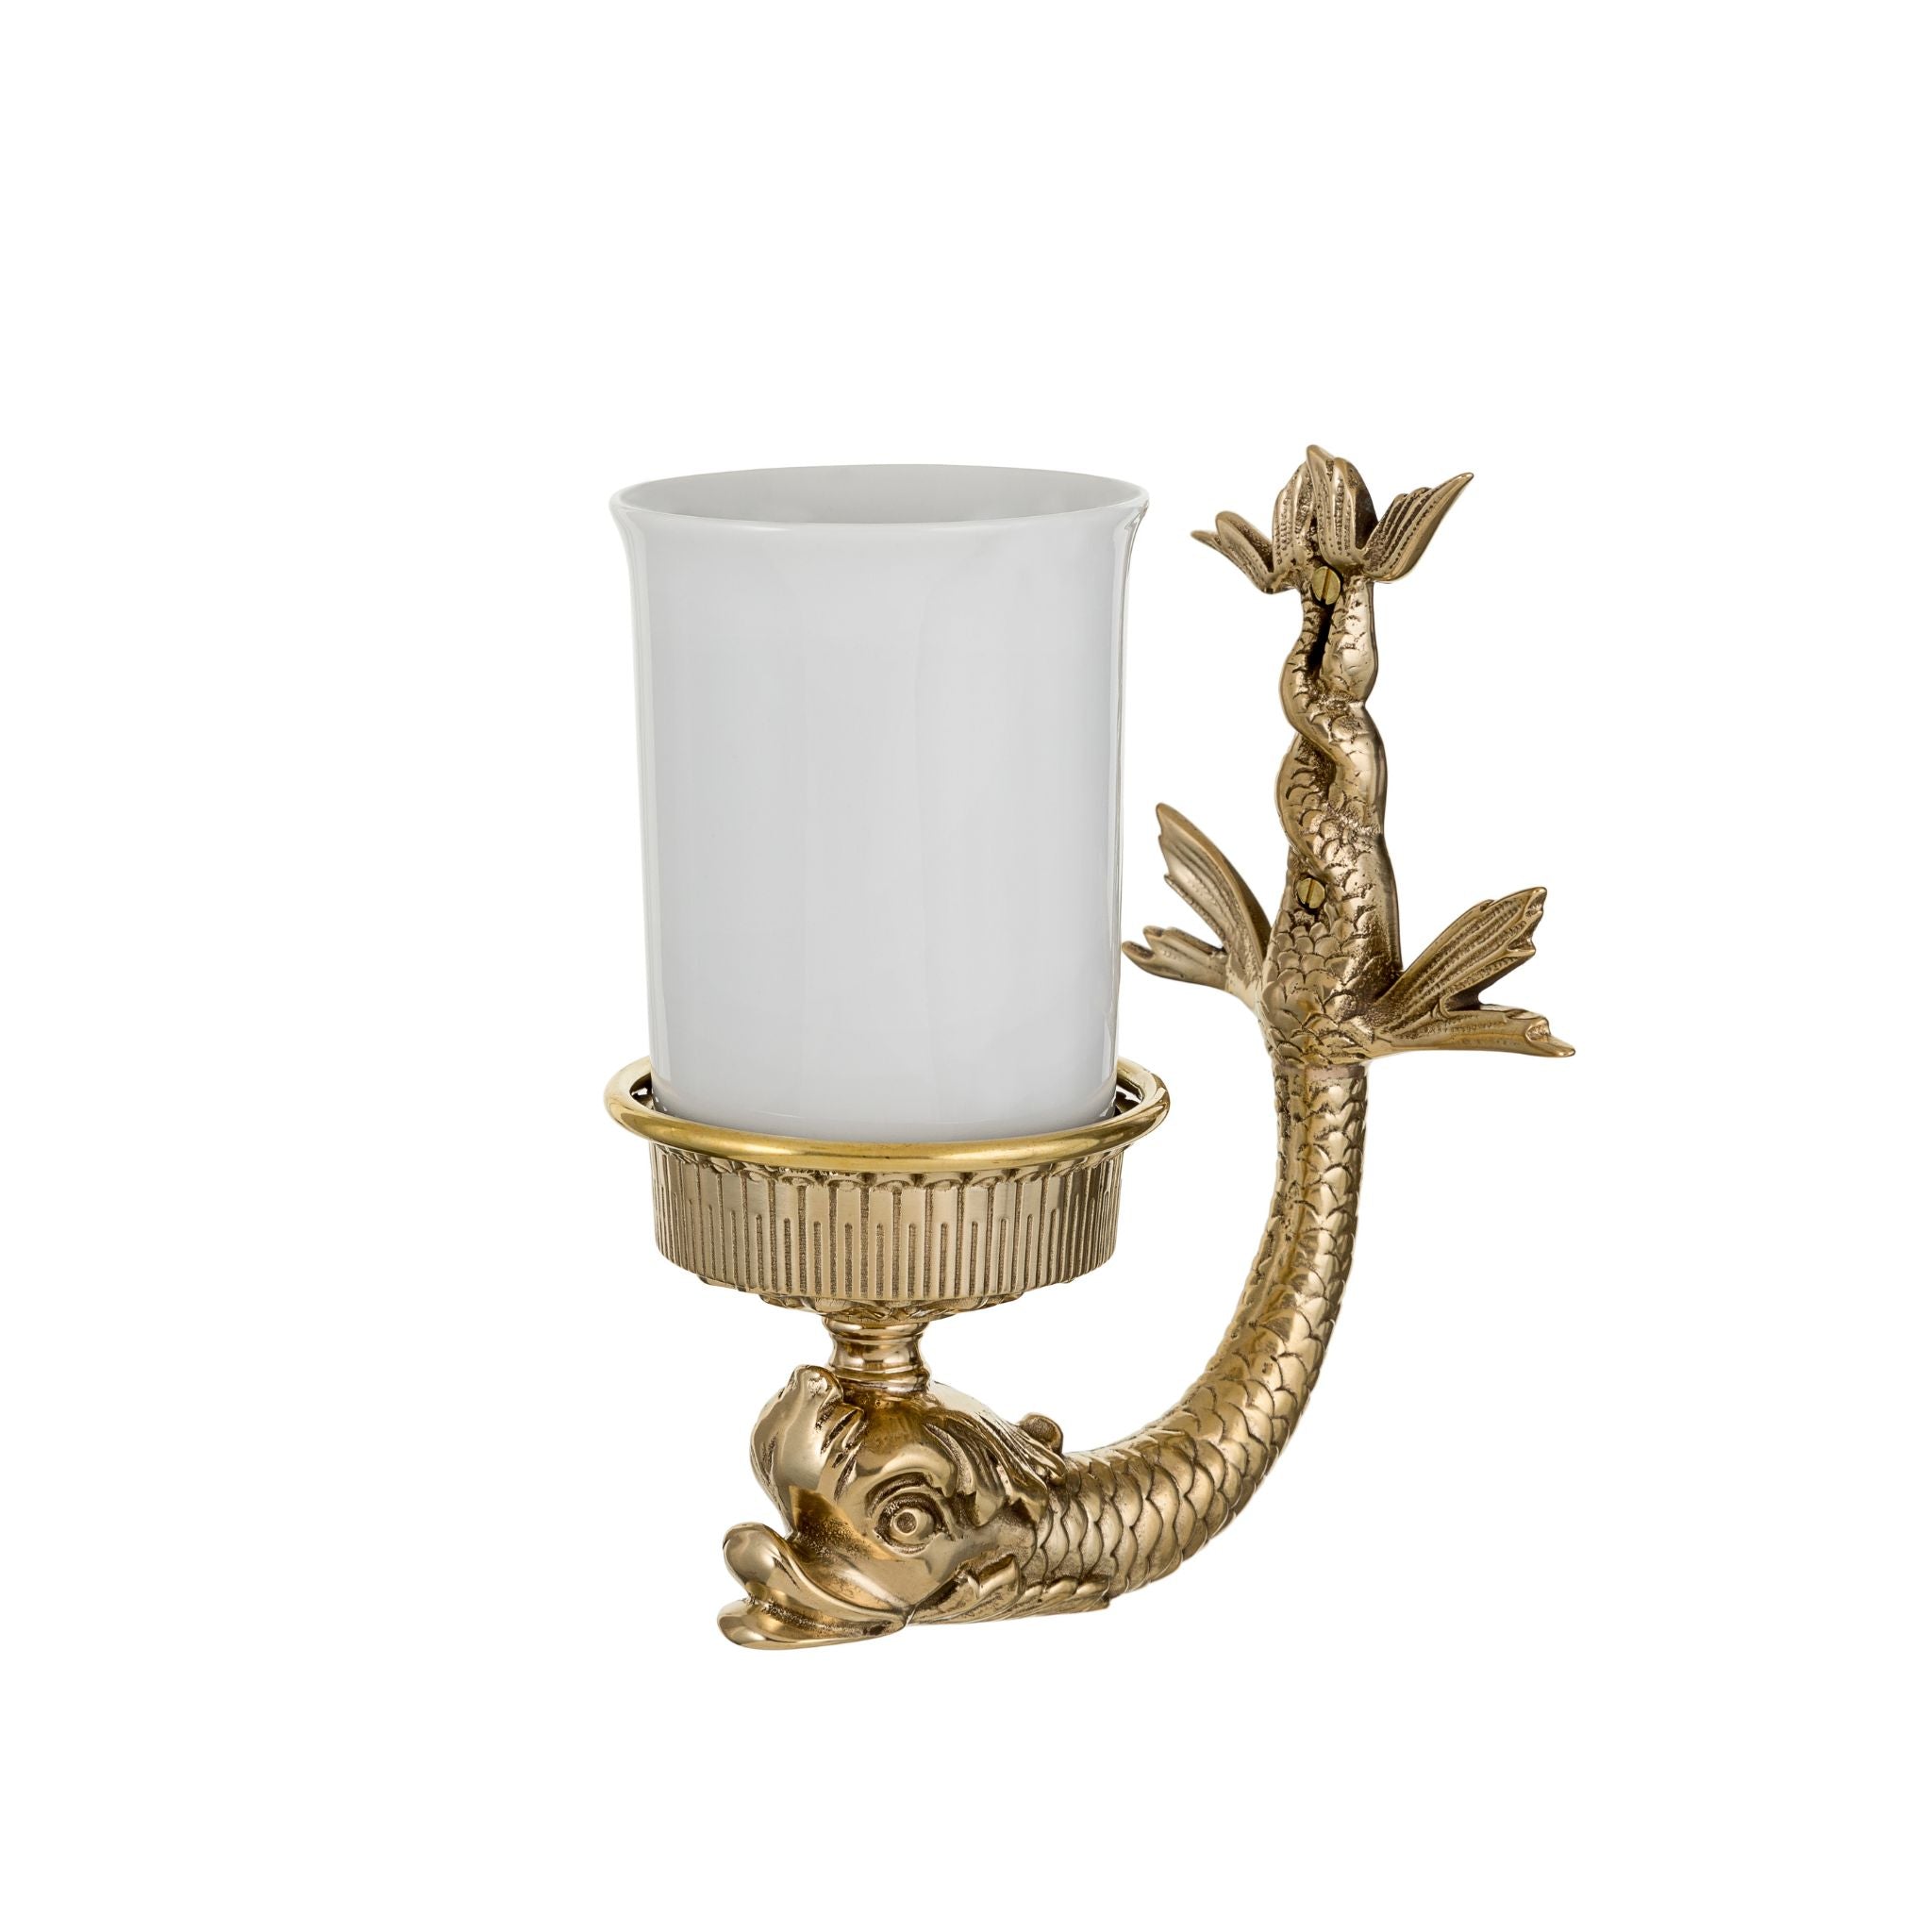 Zante ceramic and brass toothbrush holder with dolphin - ilbronzetto